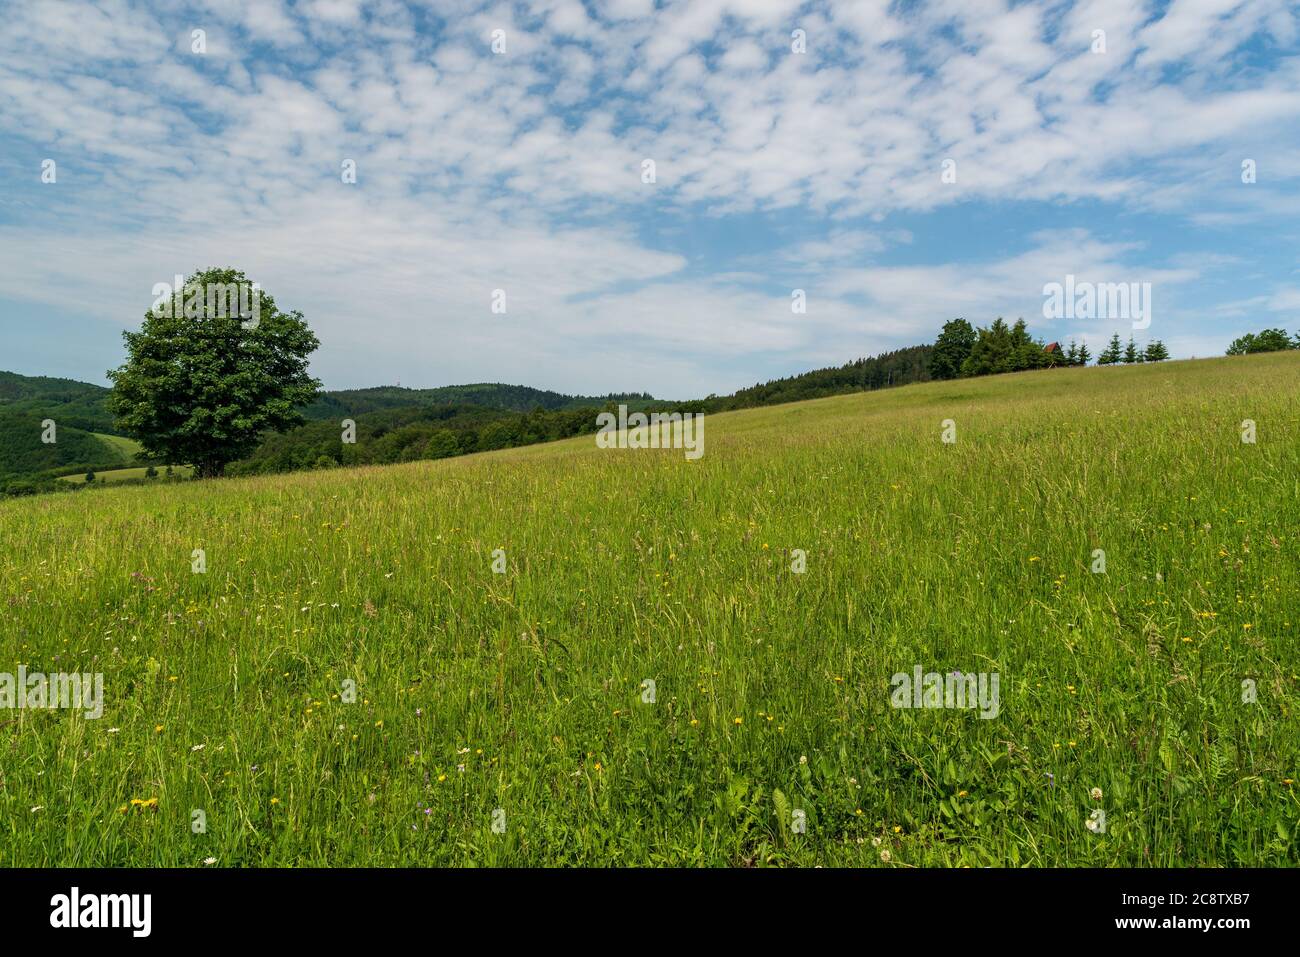 Beautiful Bile Karpaty mountains above Nedasova Lhota village on czech - slovakian borderland with meadows, trees and hills covered by forest during s Stock Photo